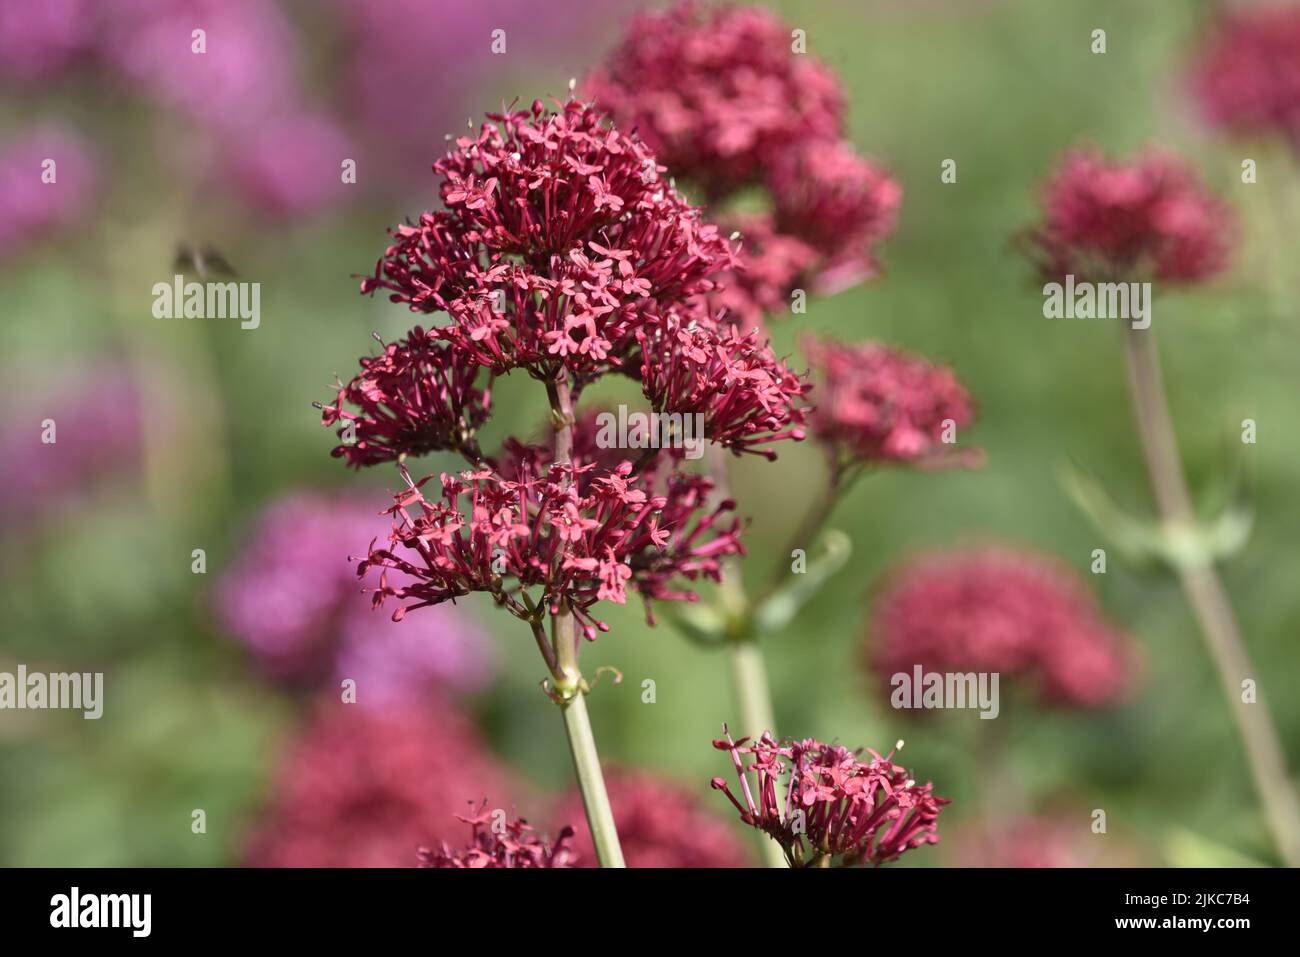 Close-Up Image of a Sunlit Red Valerian Flowerhead and Stem (Centranthus ruber) Against Pink and Red Blurred Valerian and Green Foliage Background, UK Stock Photo